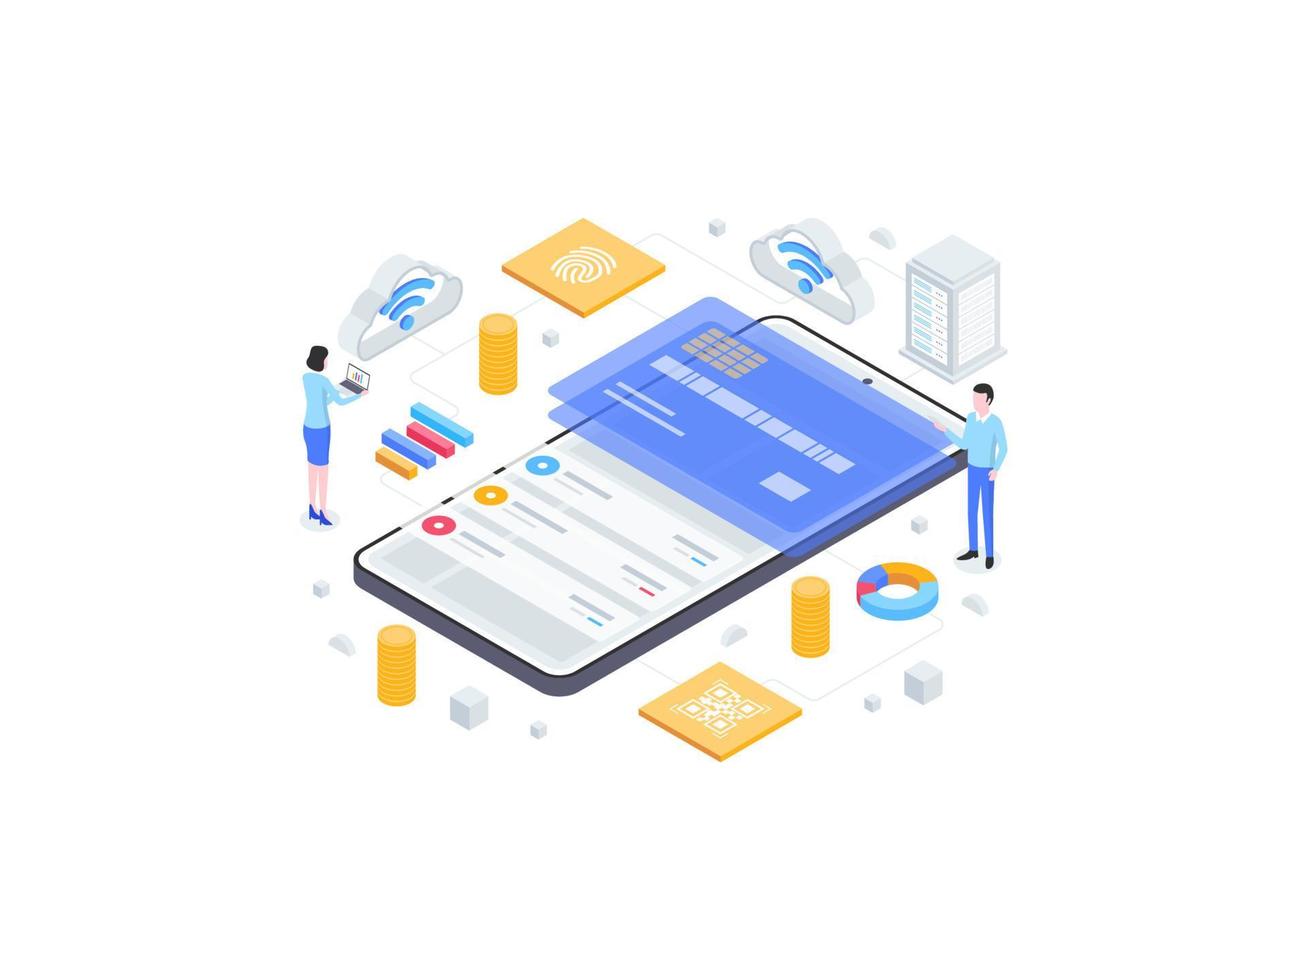 E-Wallet Isometric Flat Illustration. Suitable for Mobile App, Website, Banner, Diagrams, Infographics, and Other Graphic Assets. vector